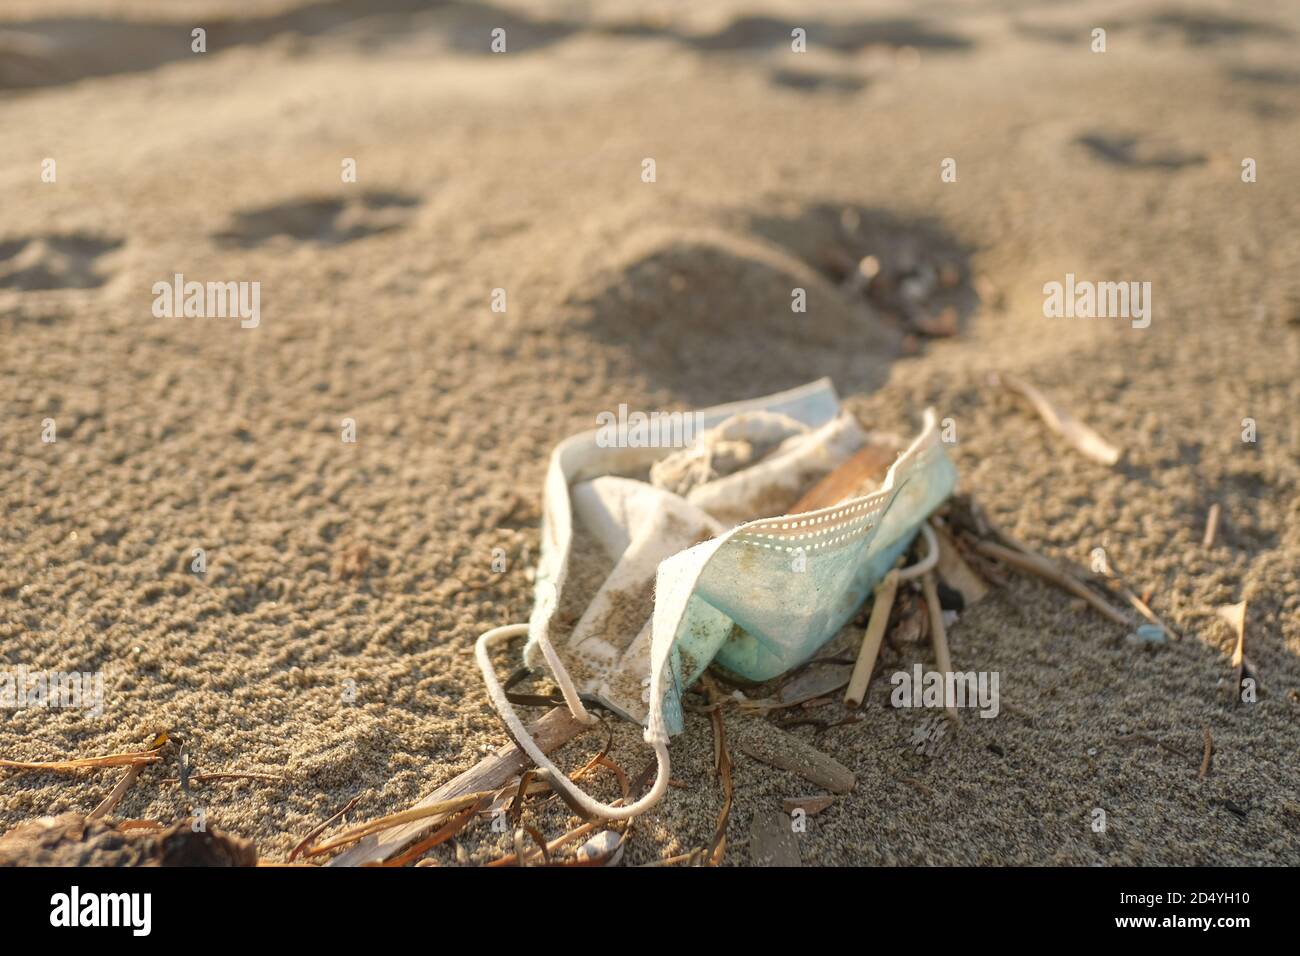 Dirty used surgical face mask discarded on sea coast ecosystem,covid19 pandemic disease pollution effects Stock Photo